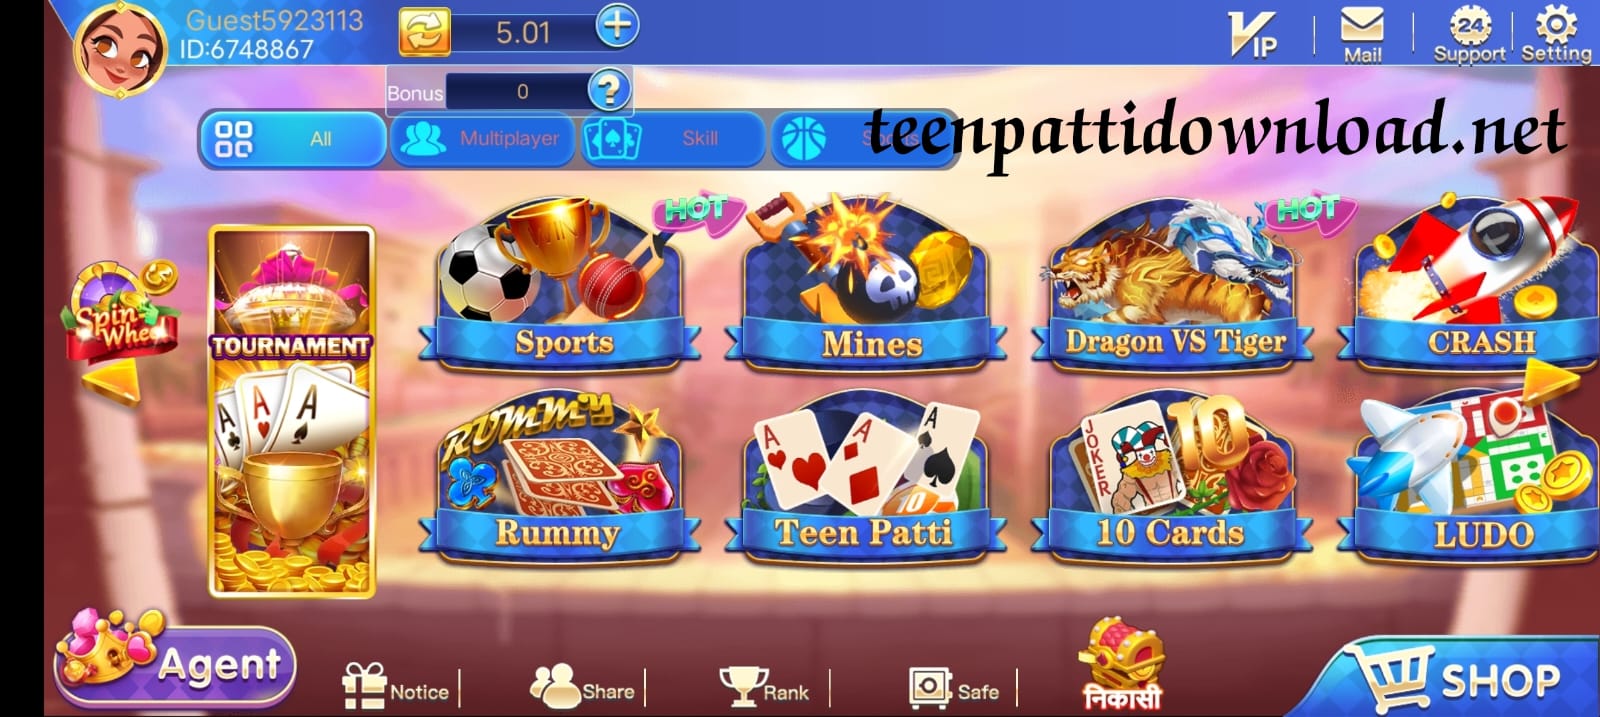 Available Game’s In Rummy Joy Application